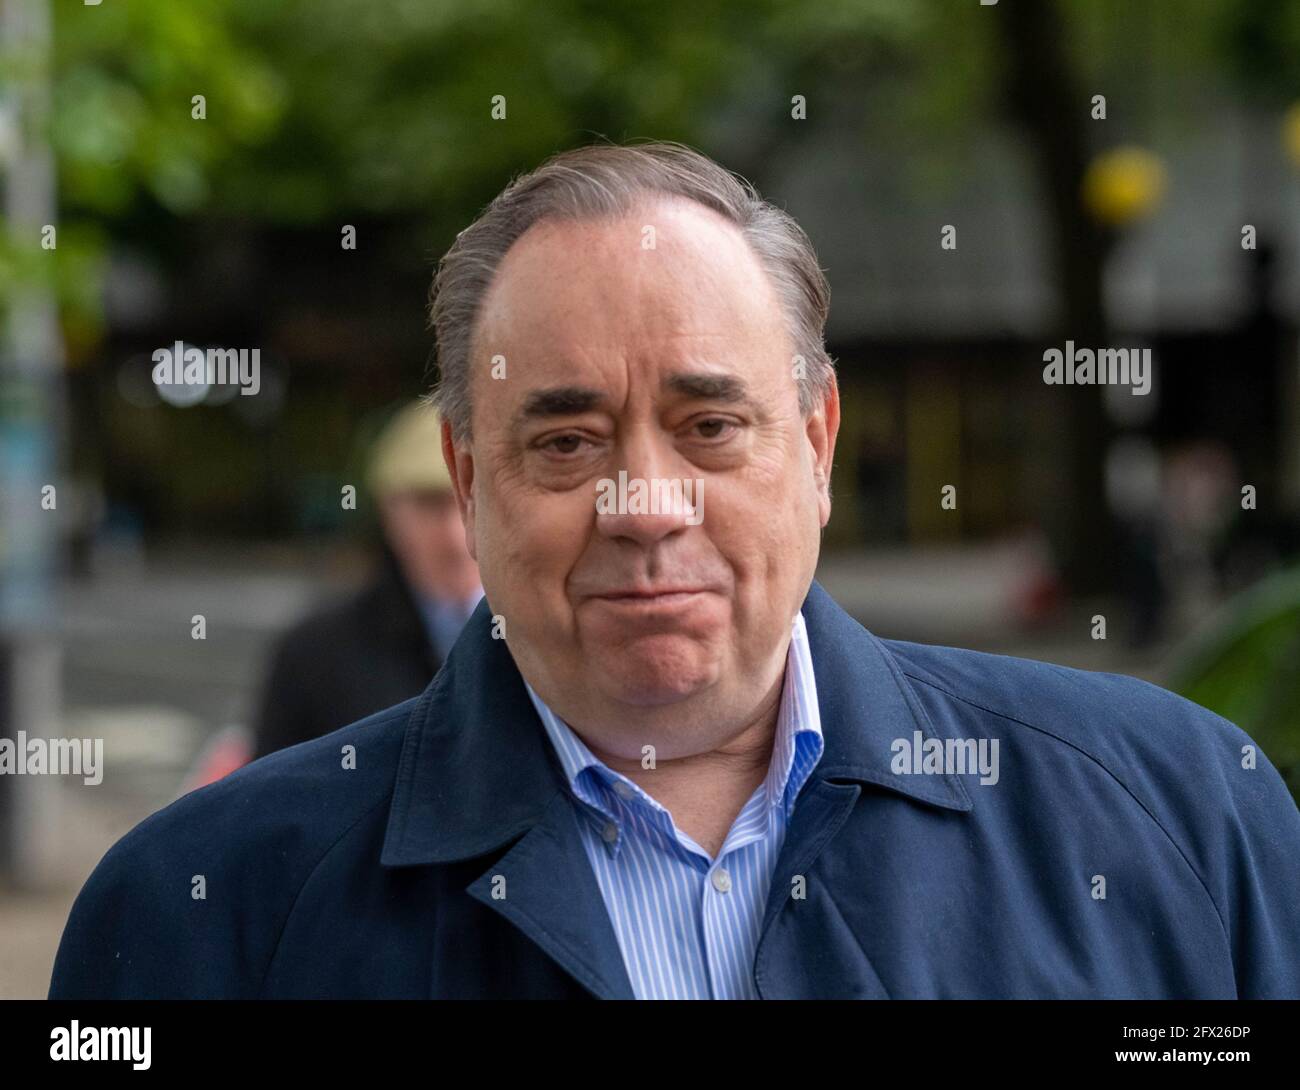 London, UK. 25th May, 2021. Alex Salmond, former Scottish Chief Minister, outside the Houses of Parliament Credit: Ian Davidson/Alamy Live News Stock Photo